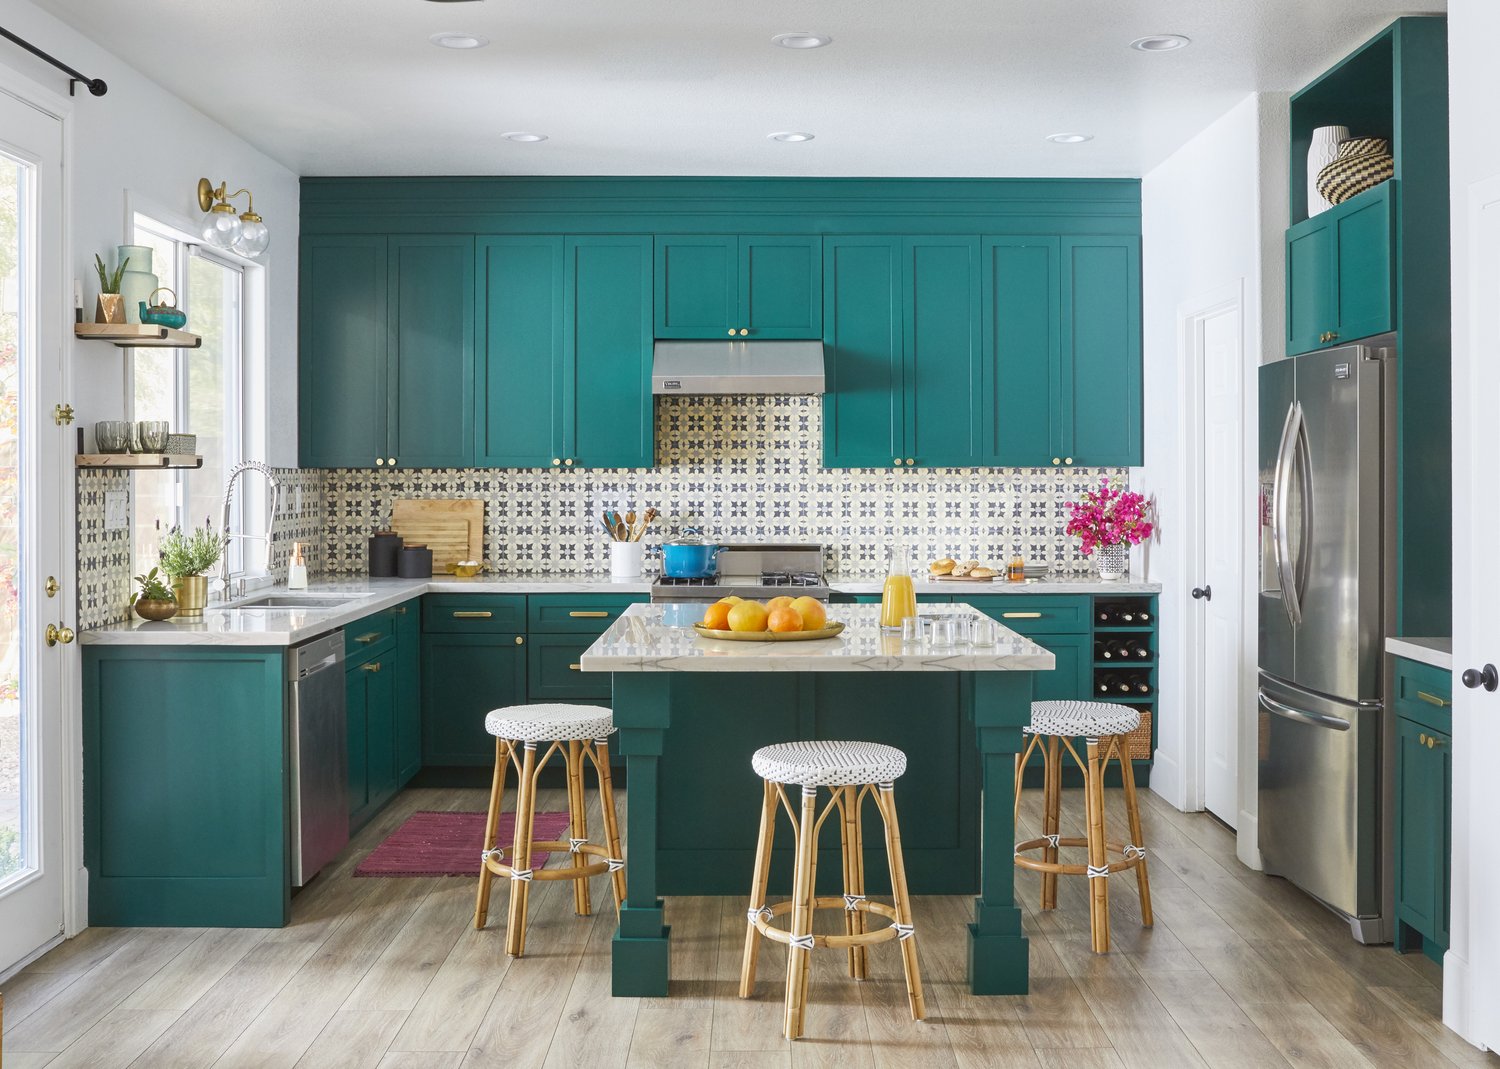 benjamin moore forest green is a beloved jewel tone paint color on the cabinets of this playful kitchen